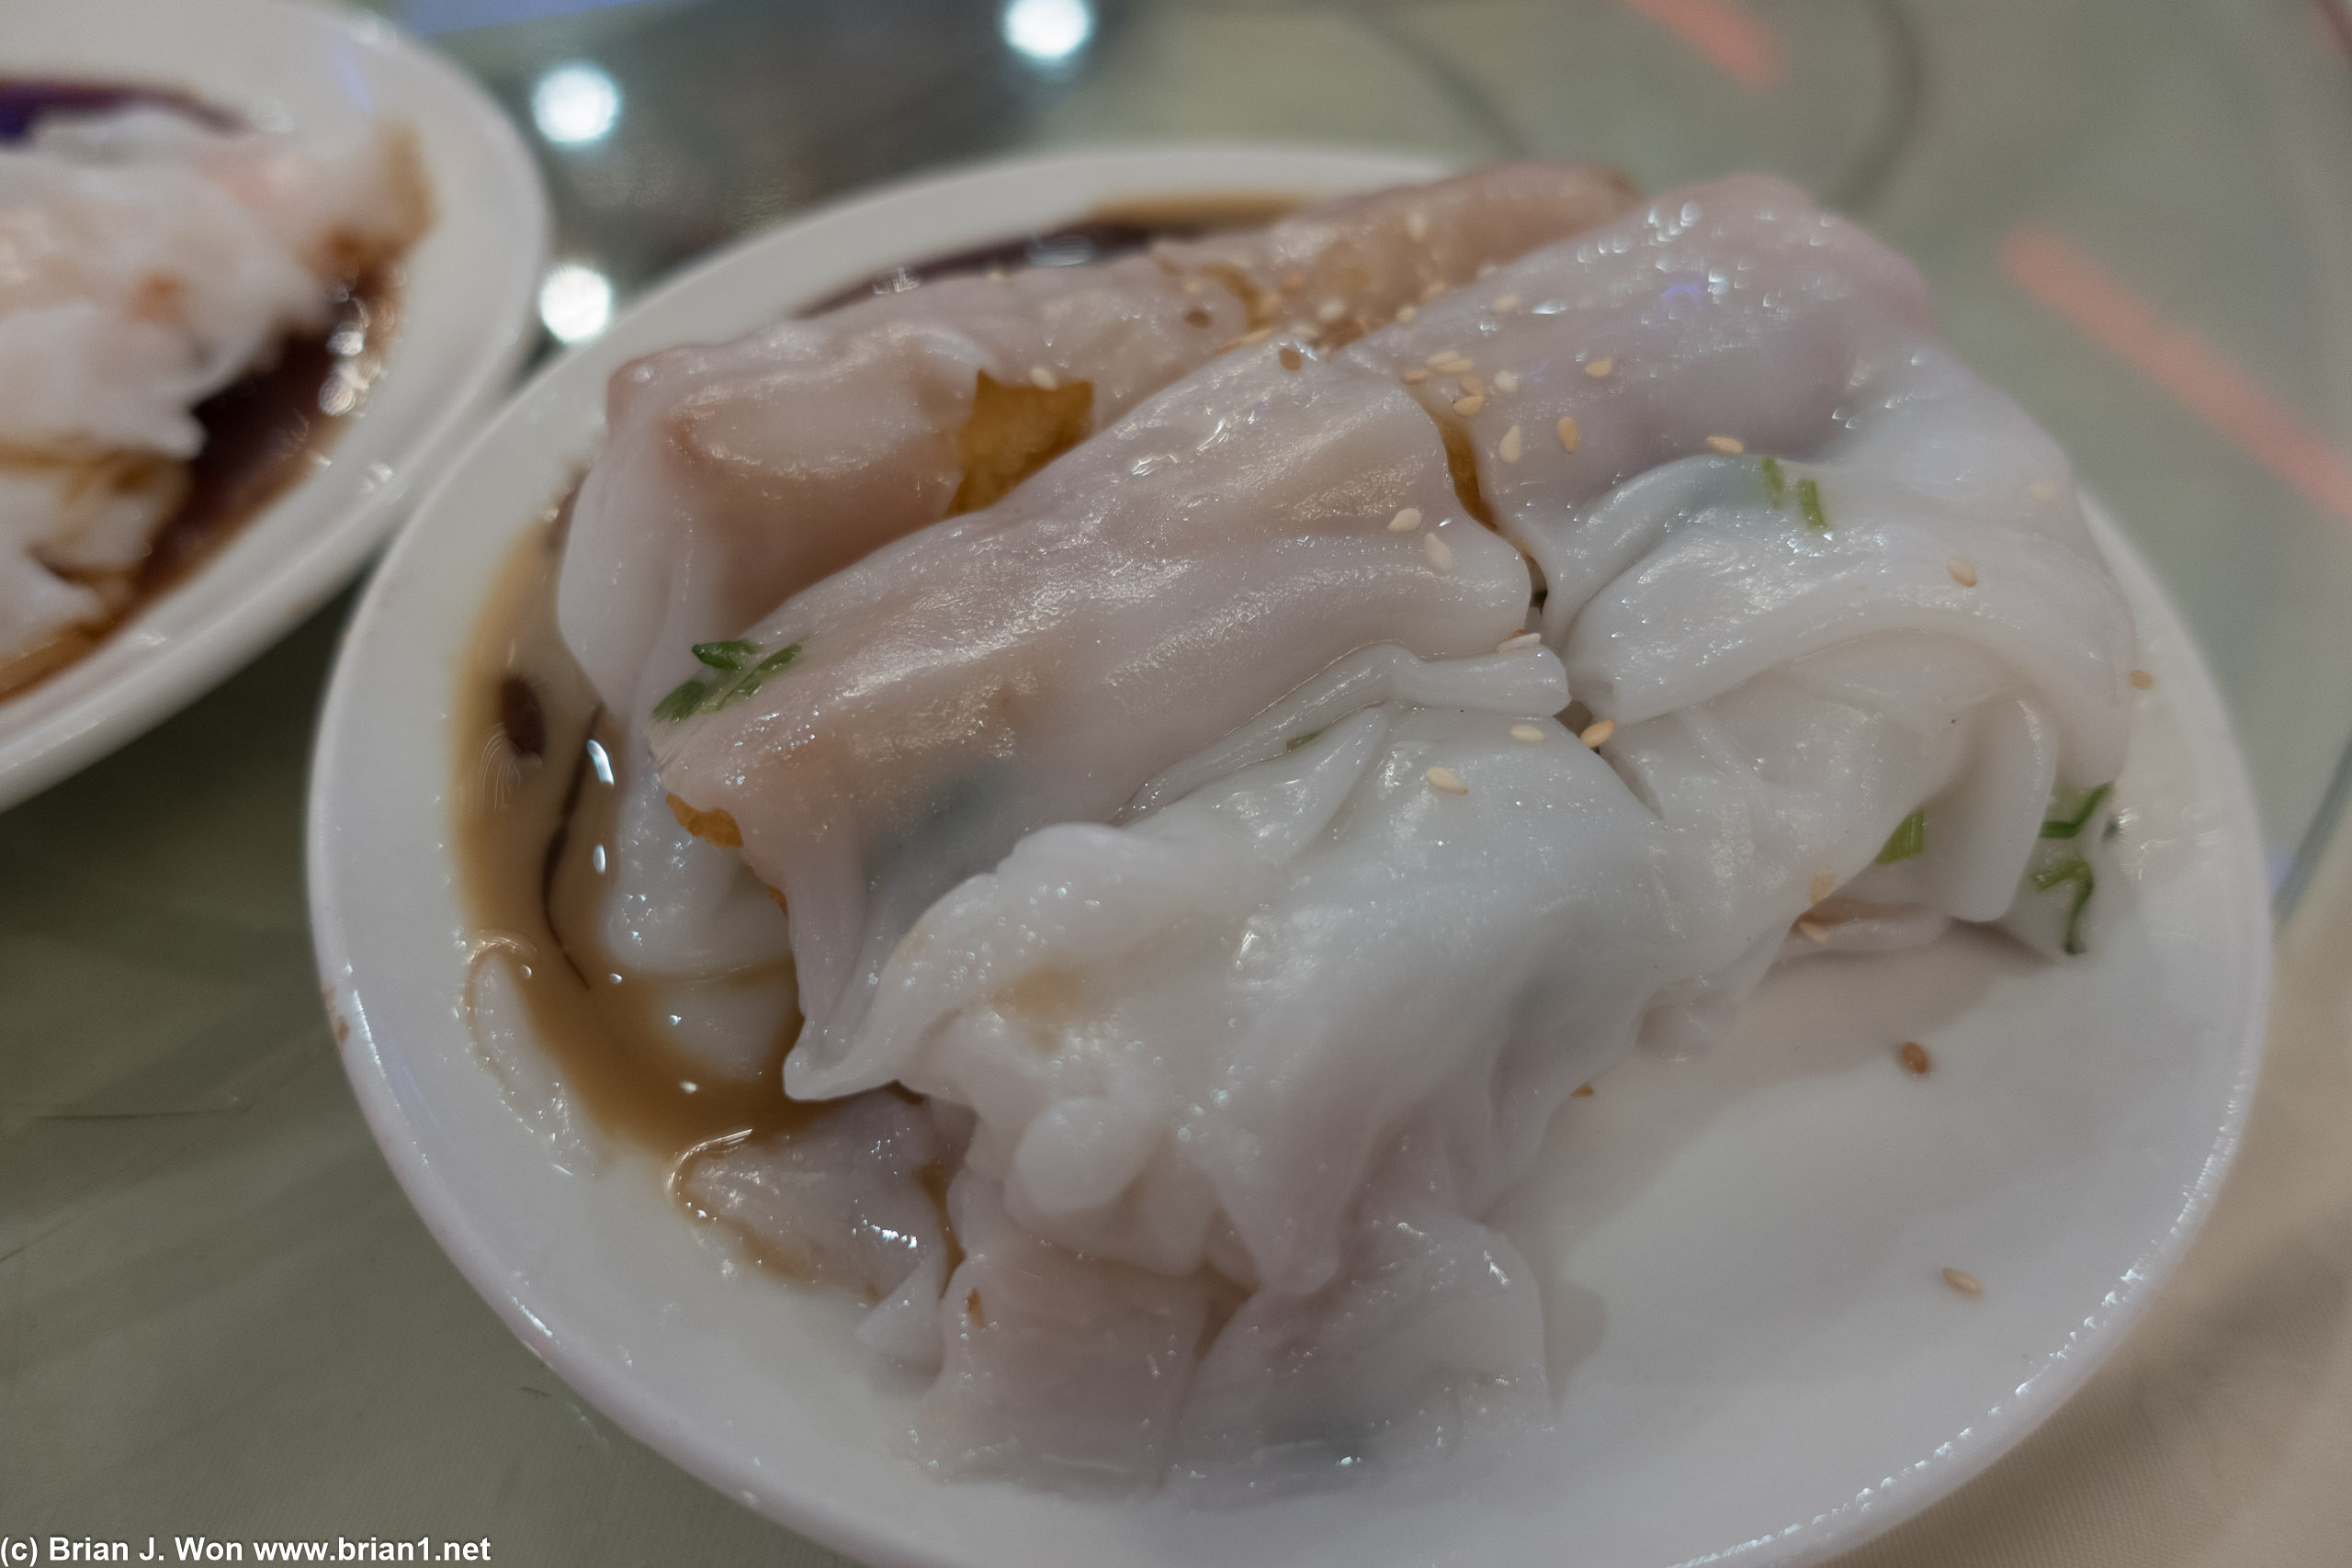 Dja cheung fun-- yeow teow (fried bread) in rice noodle.